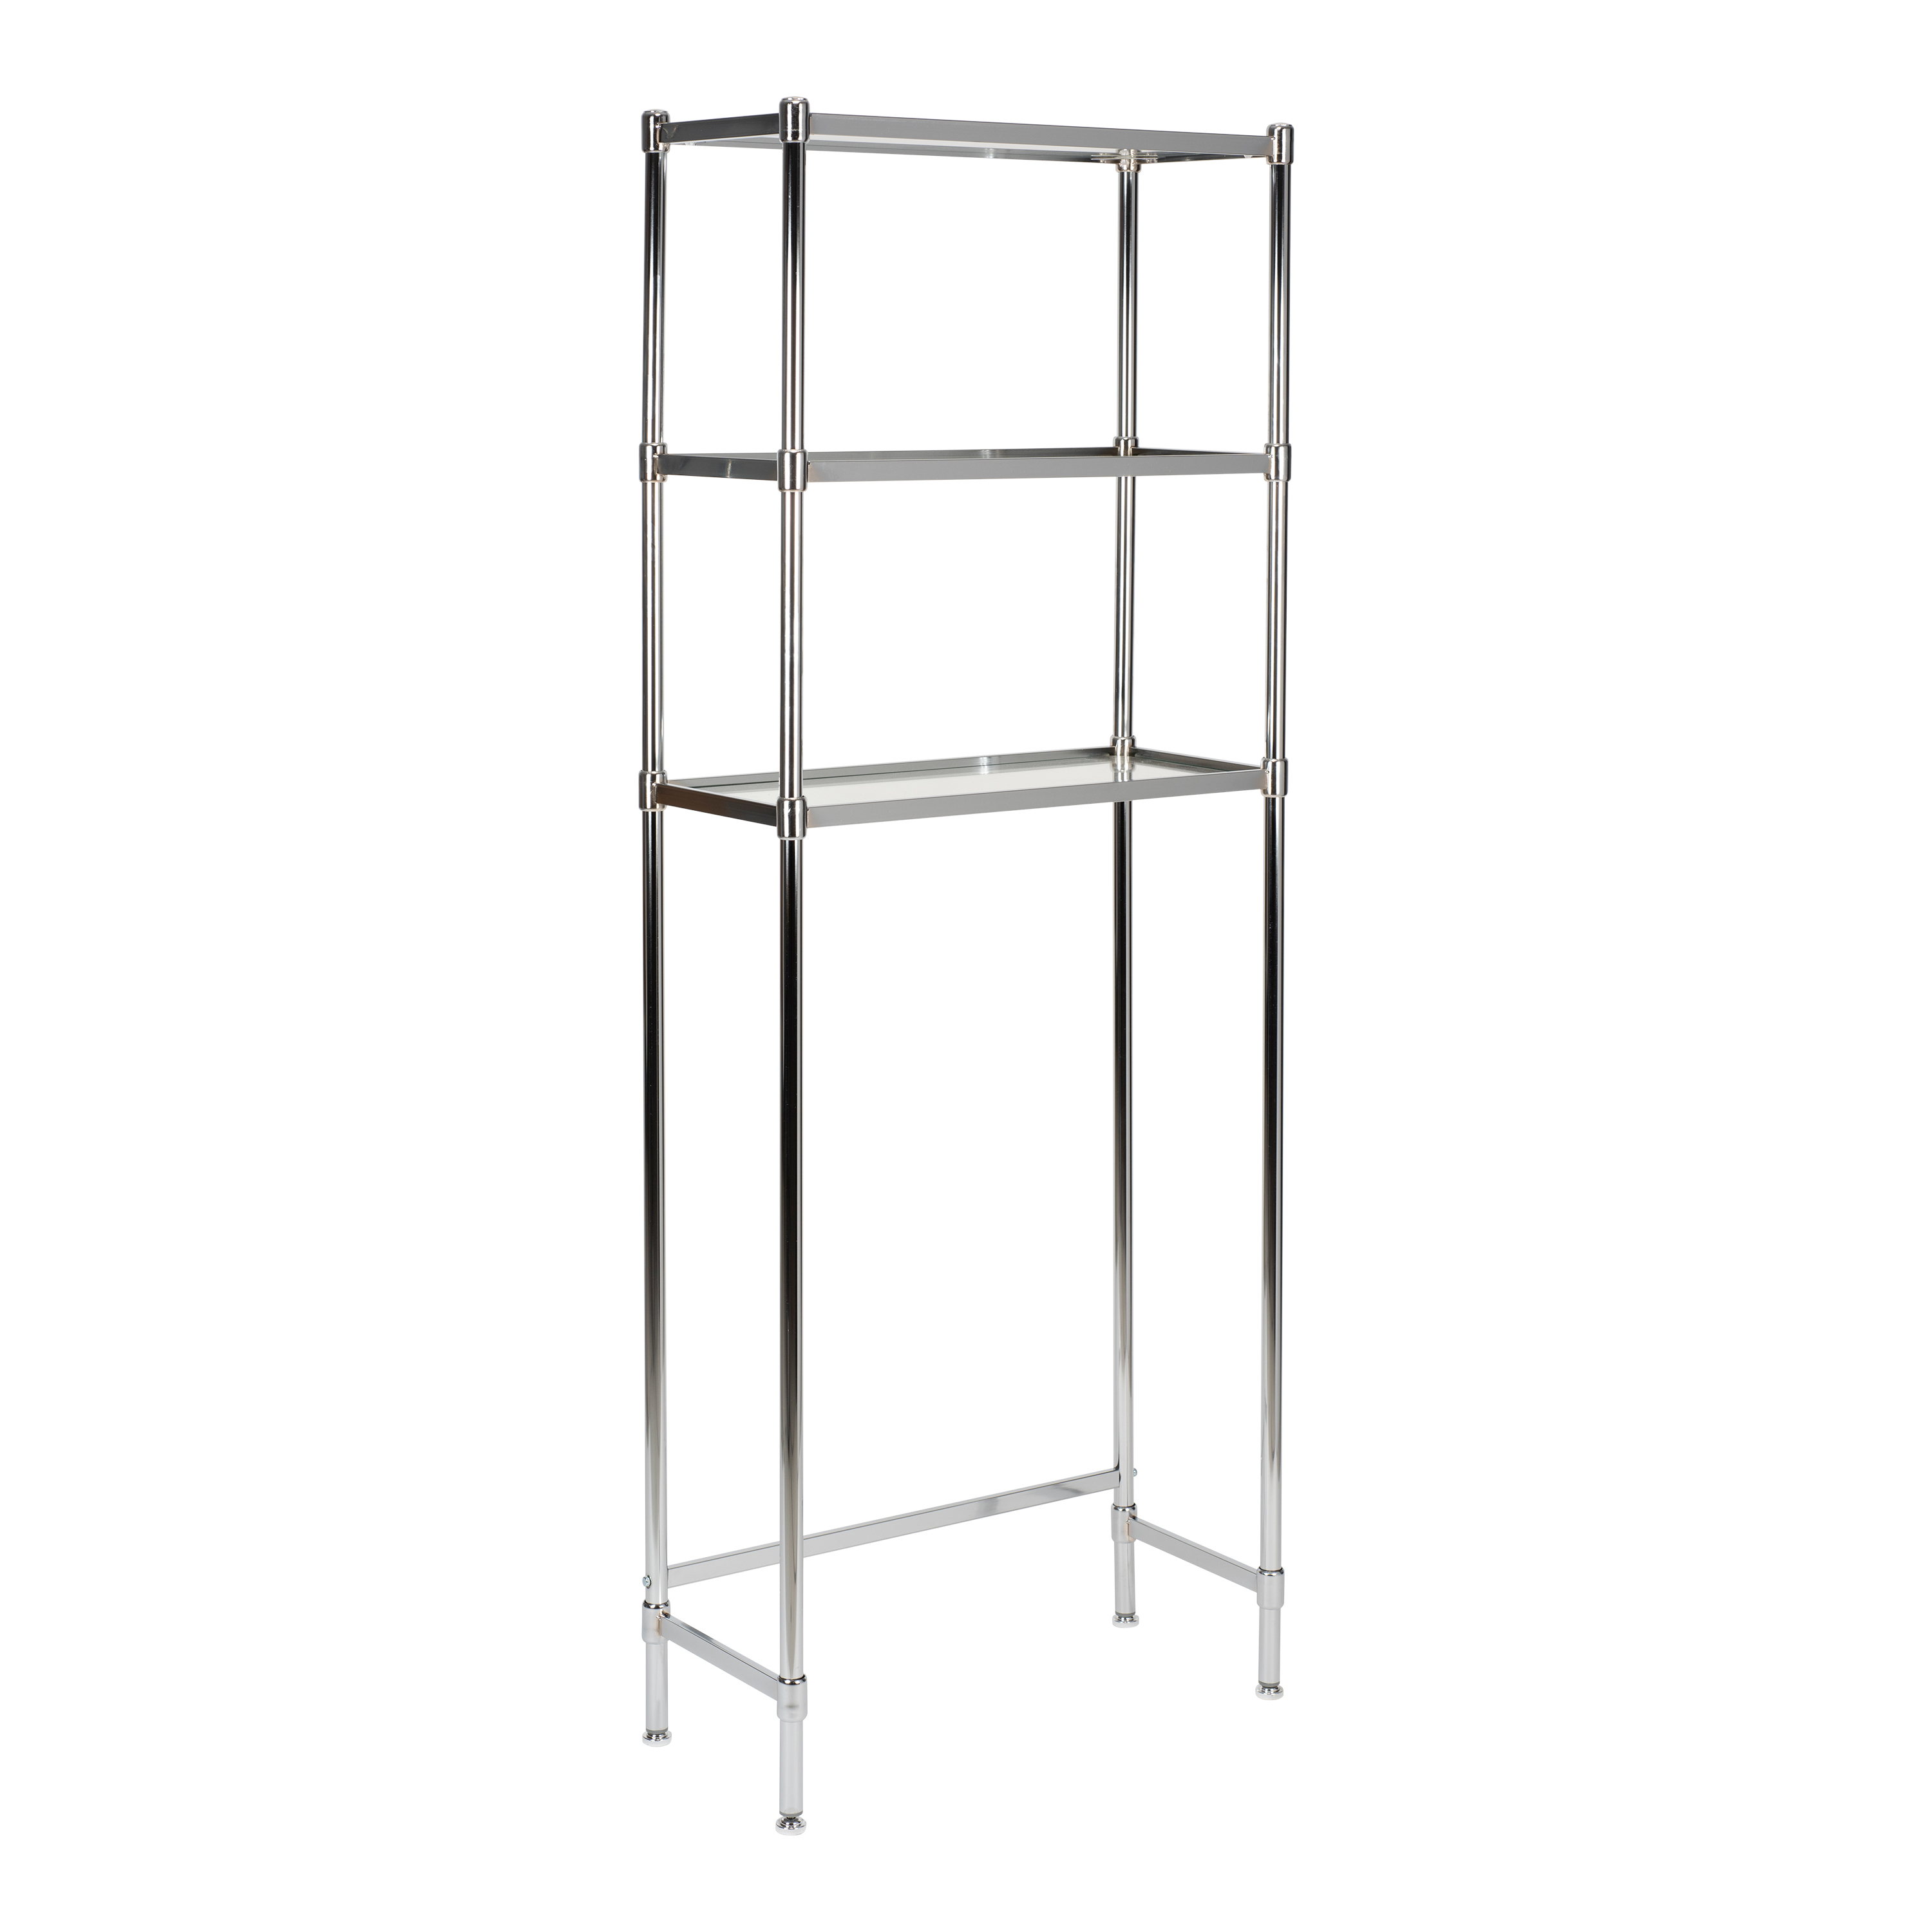 Organize It All 3 Tier Glass Shelf Space Saver - image 1 of 7